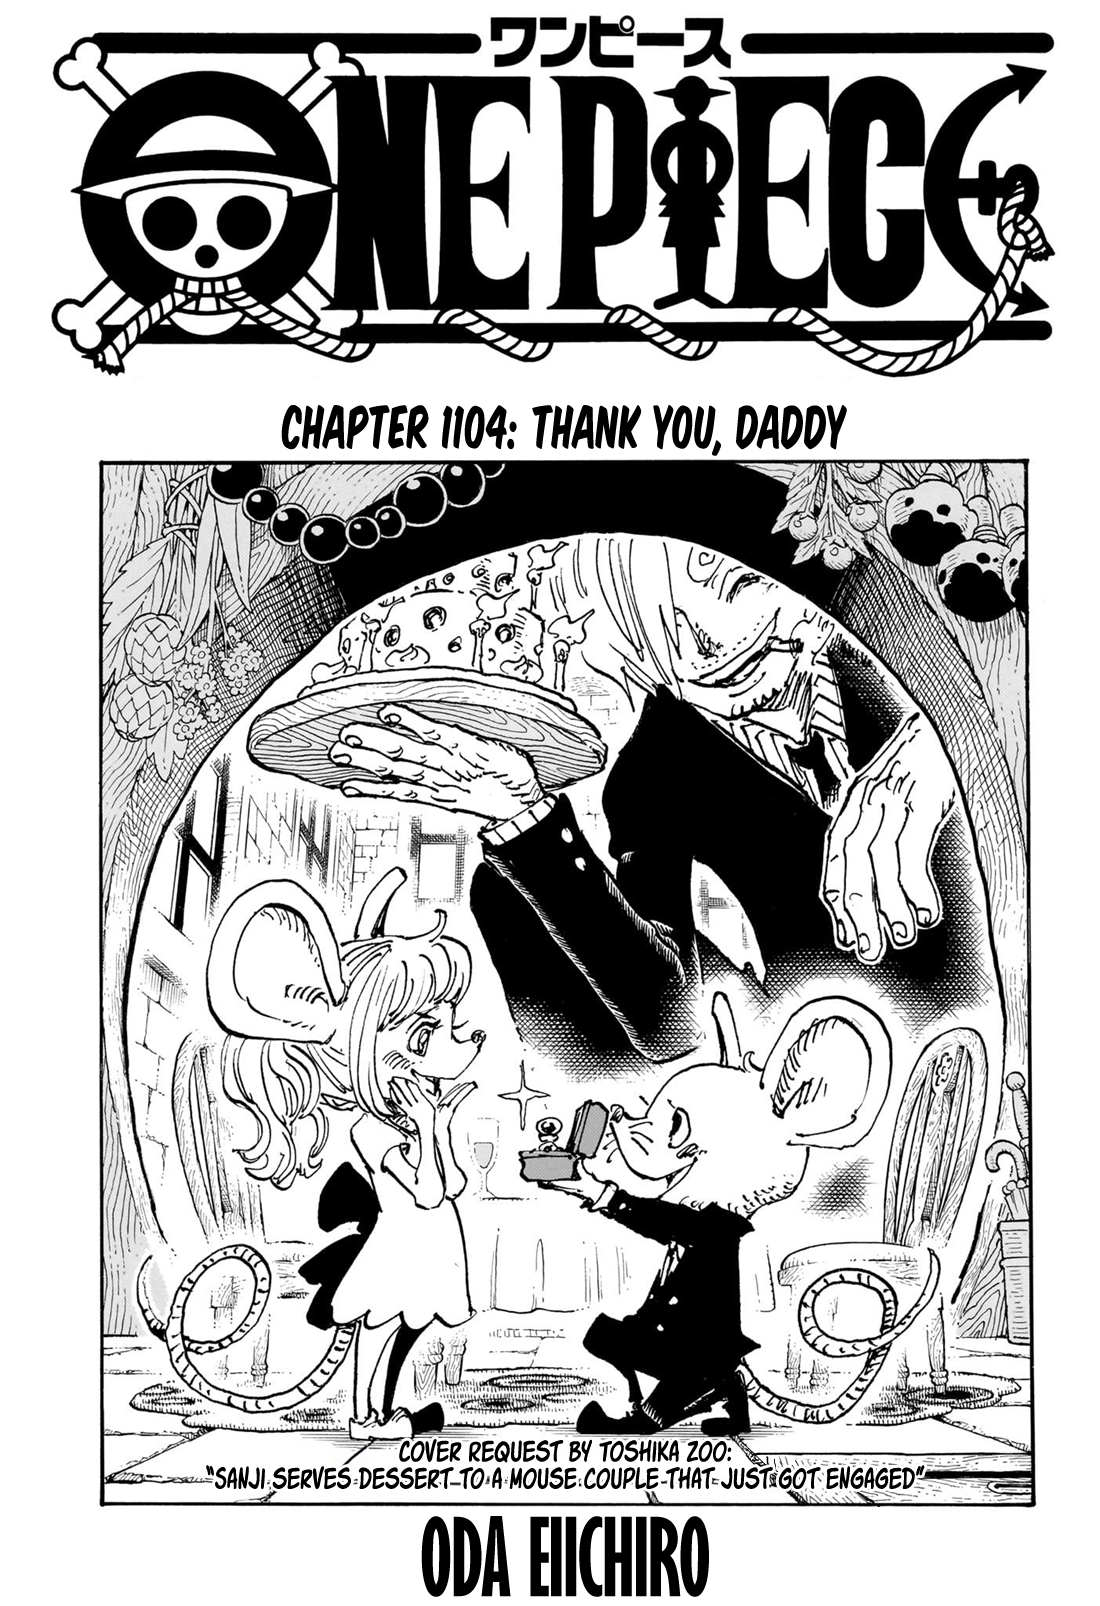 One Piece, Chapter 1104 | TcbScans Net - Free Manga Online in High 